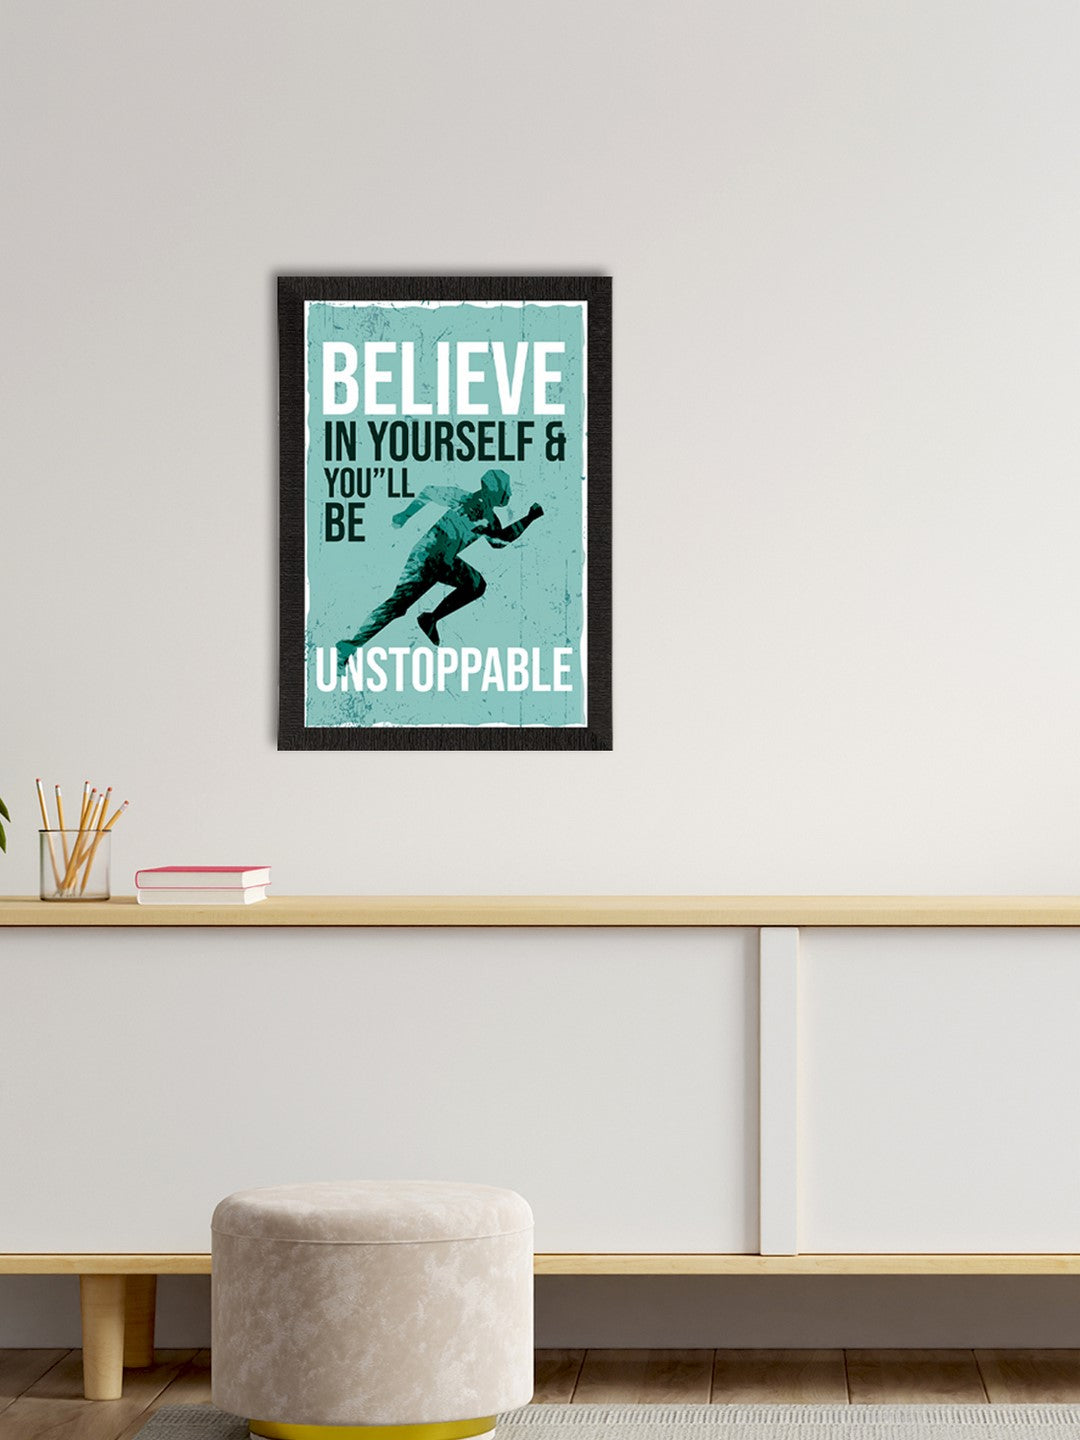 "BELIEVE In Yourself & You'll Be UNSTOPPABLE" Motivational Quote Satin Matt Texture UV Art Painting 2